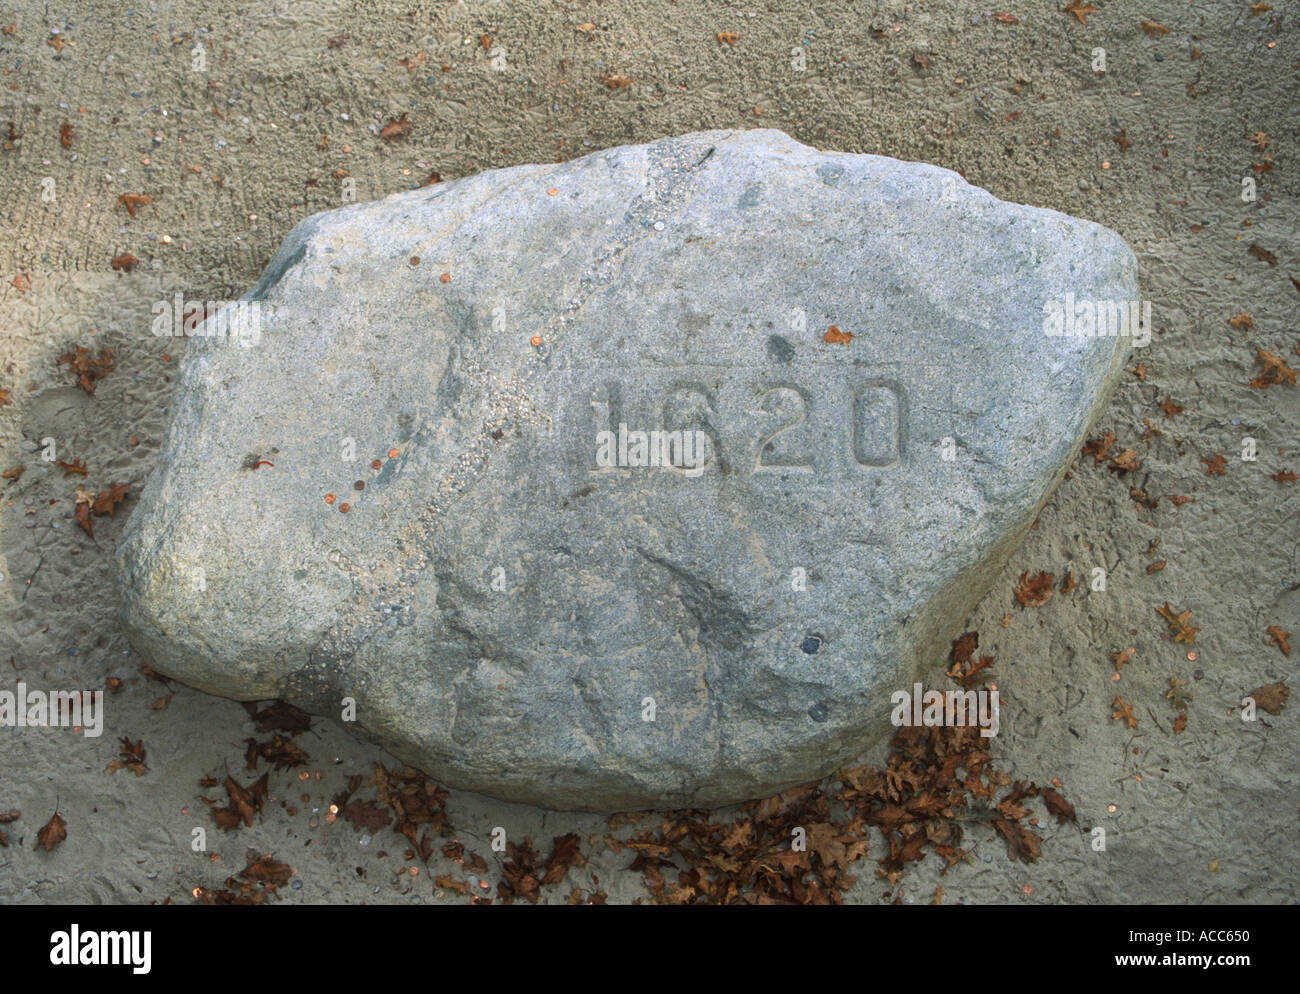 Plymouth Rock the place where the Pilgrims landed in 1620 in Massachusetts USA Stock Photo